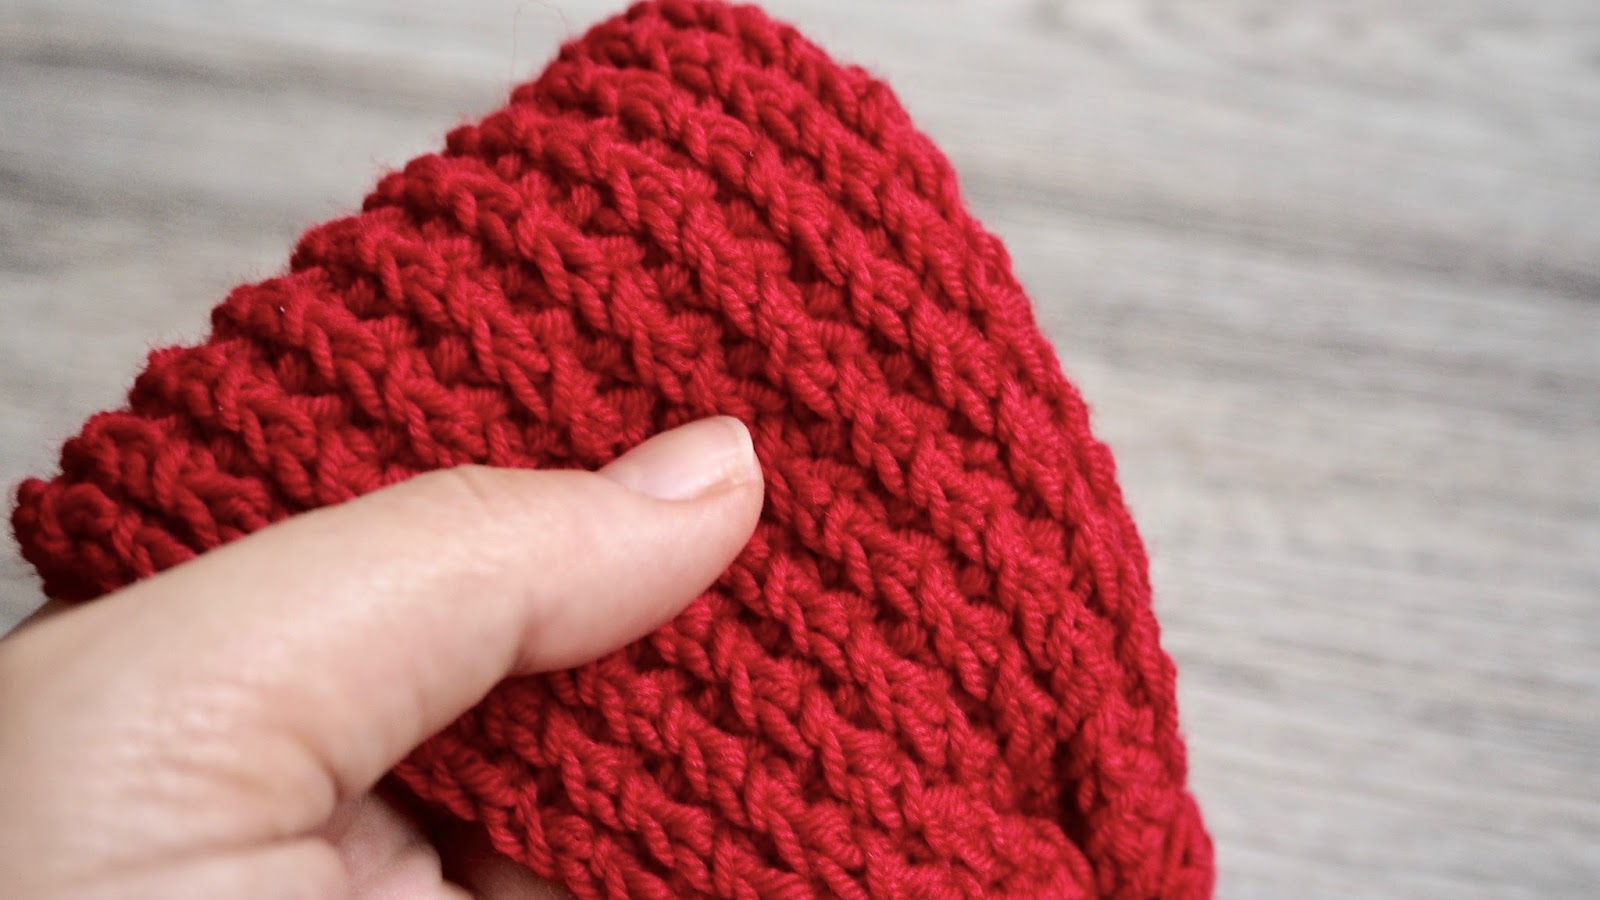 Free knitting pattern for a headband with two strands of wool